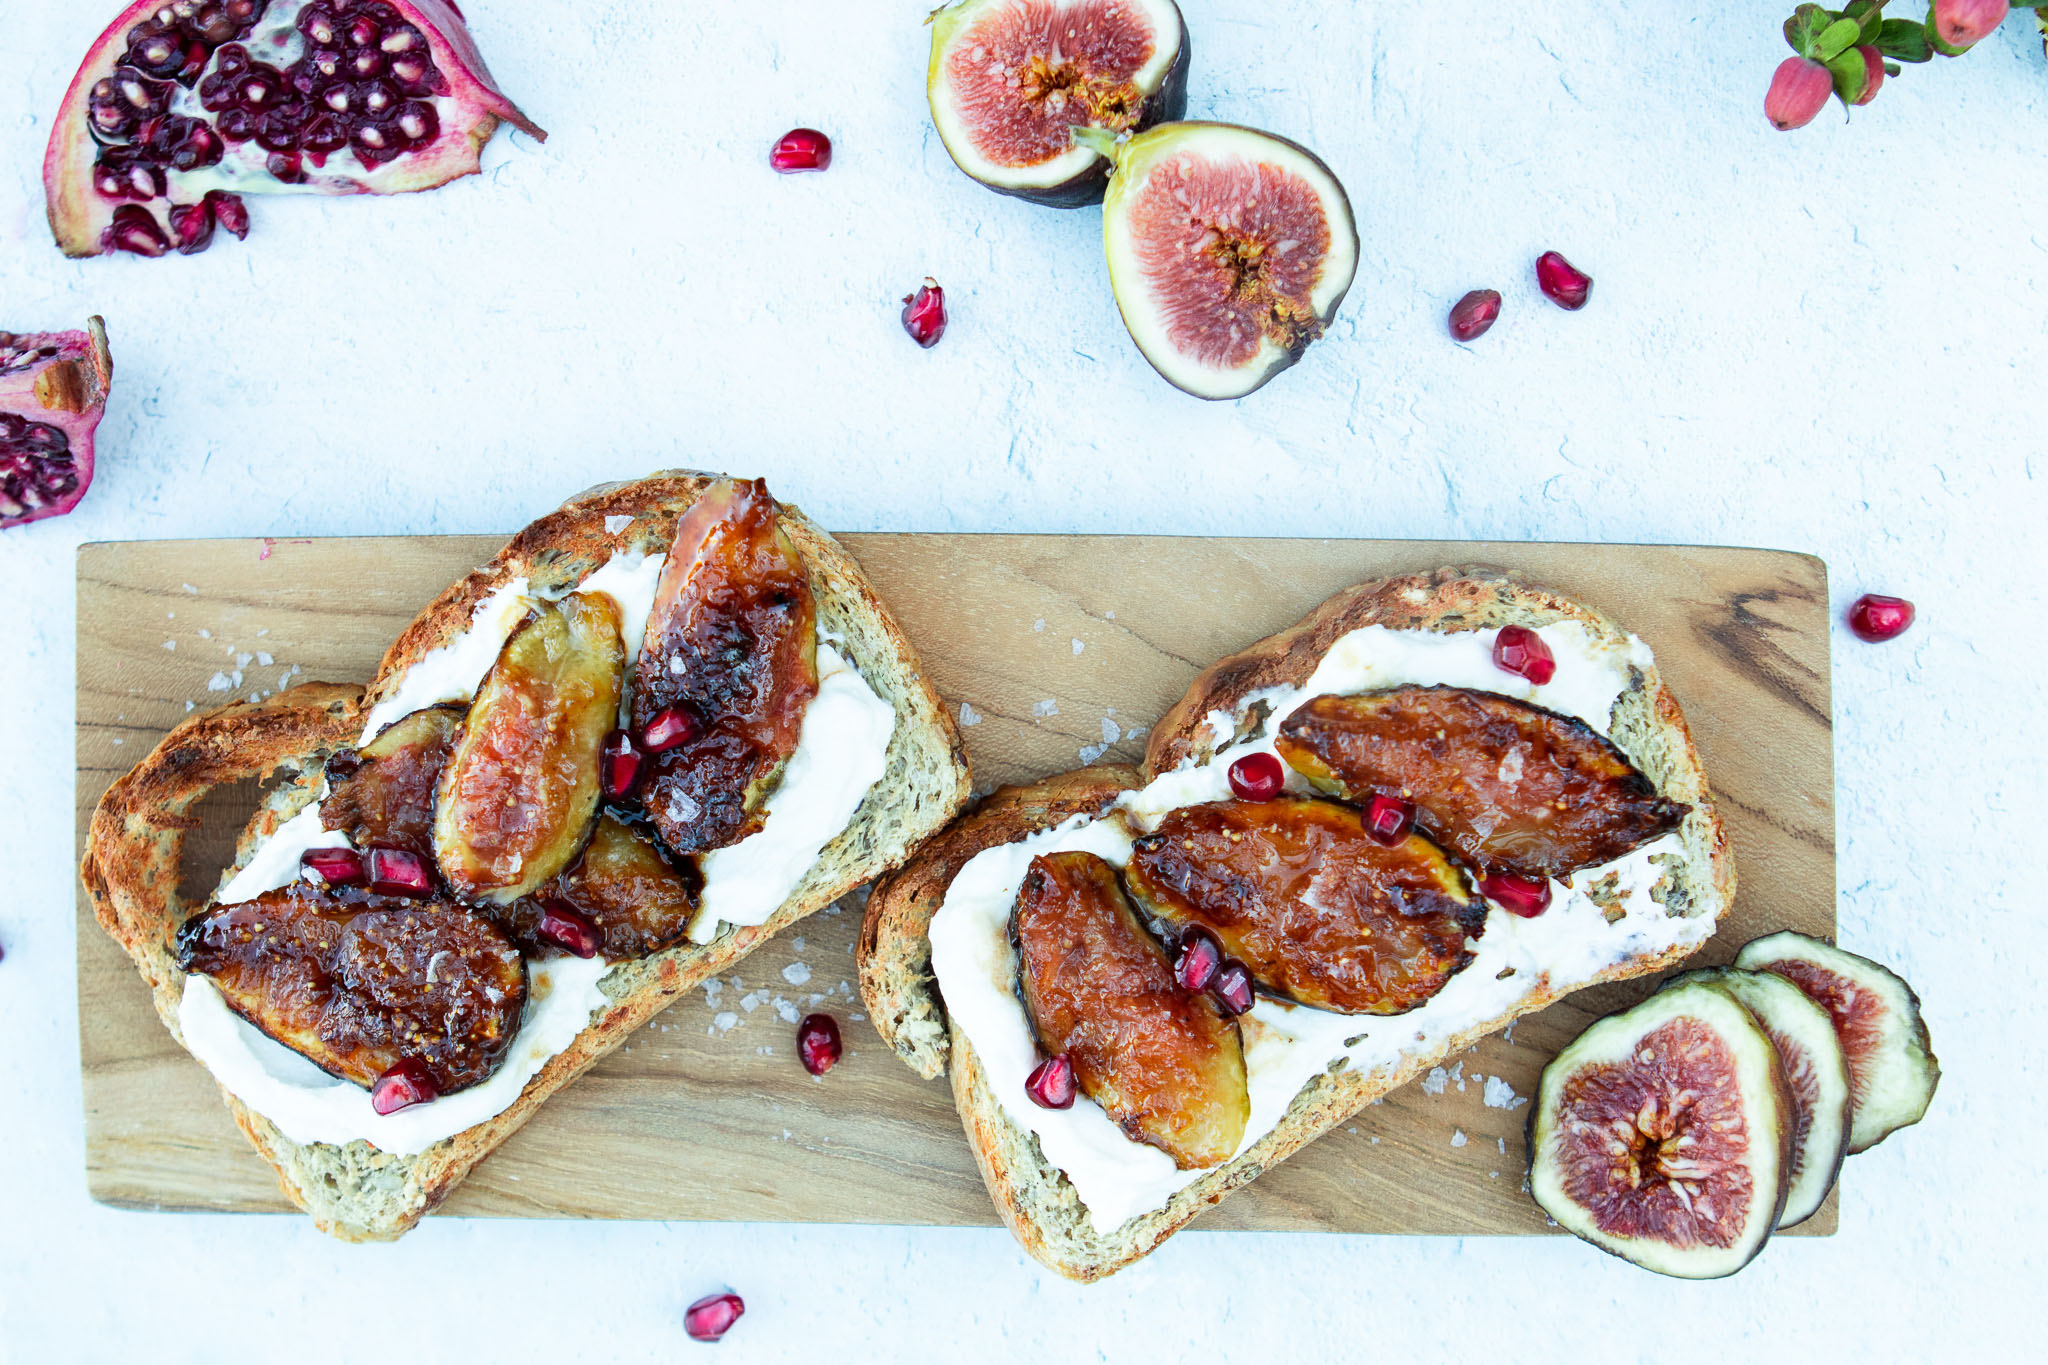 CARAMELIZED FIG AND RICOTTA TOASTS